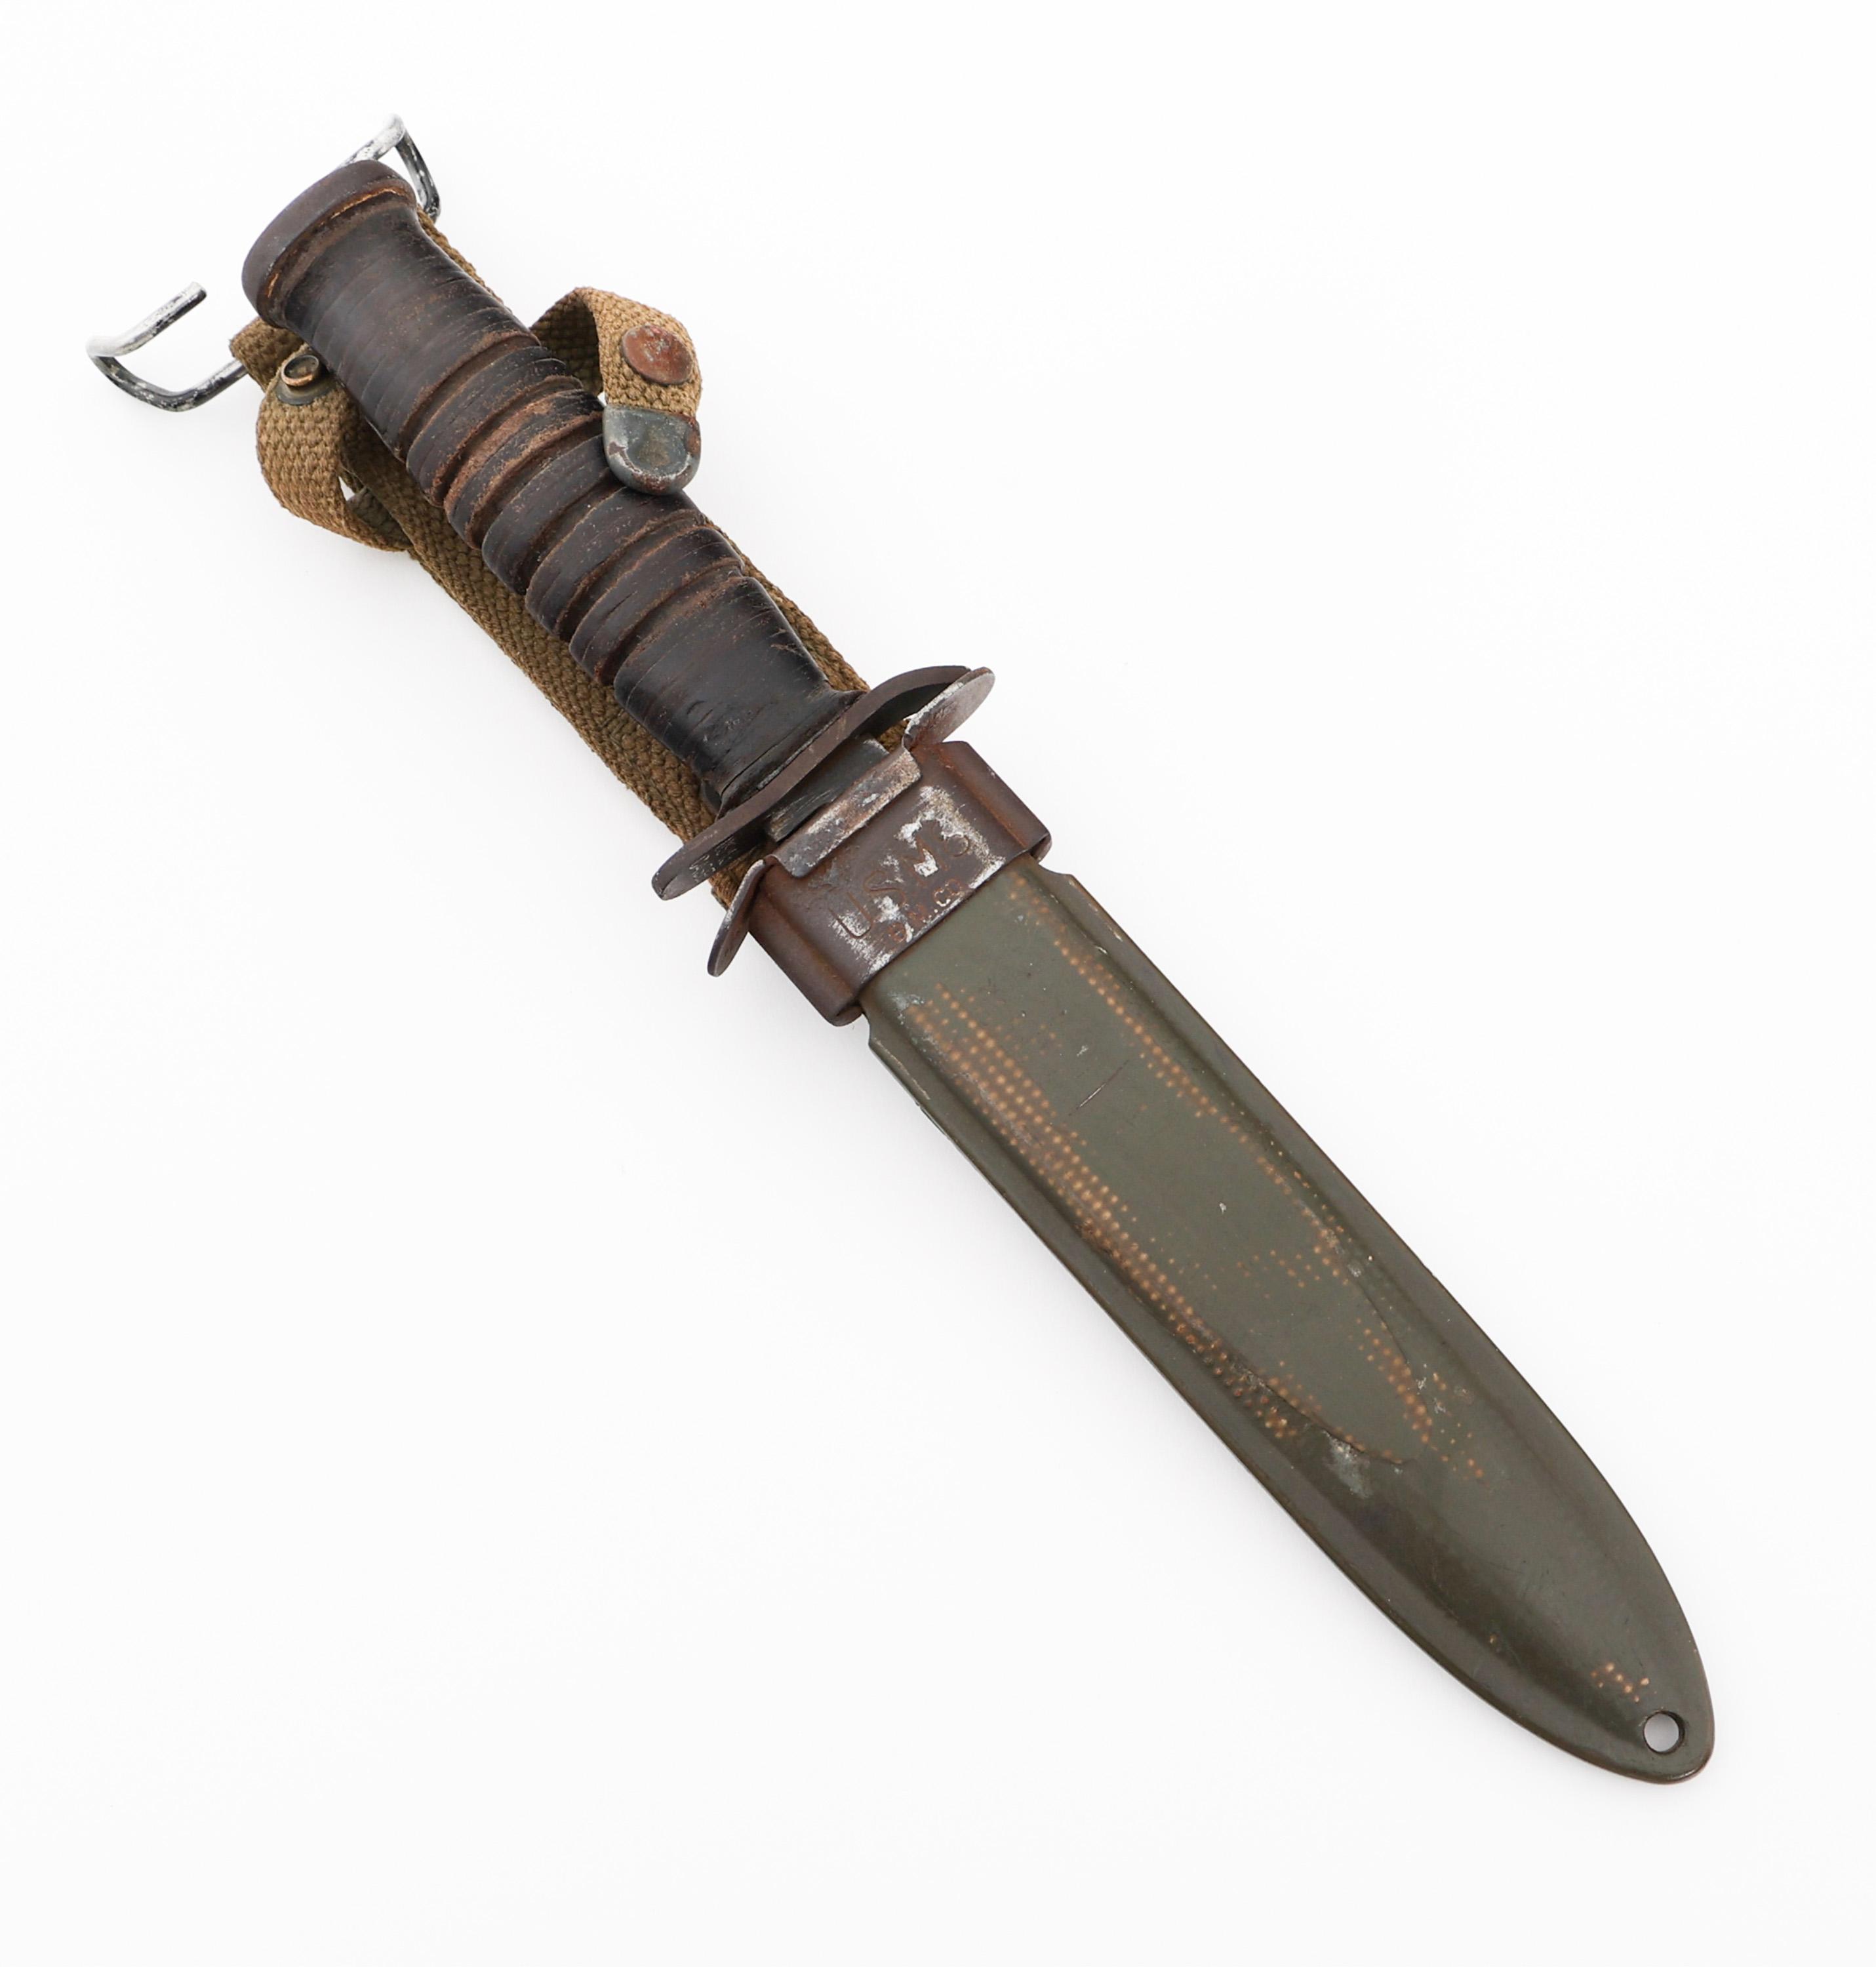 WWII US ARMY M3 FIGHTING KNIFE by CASE